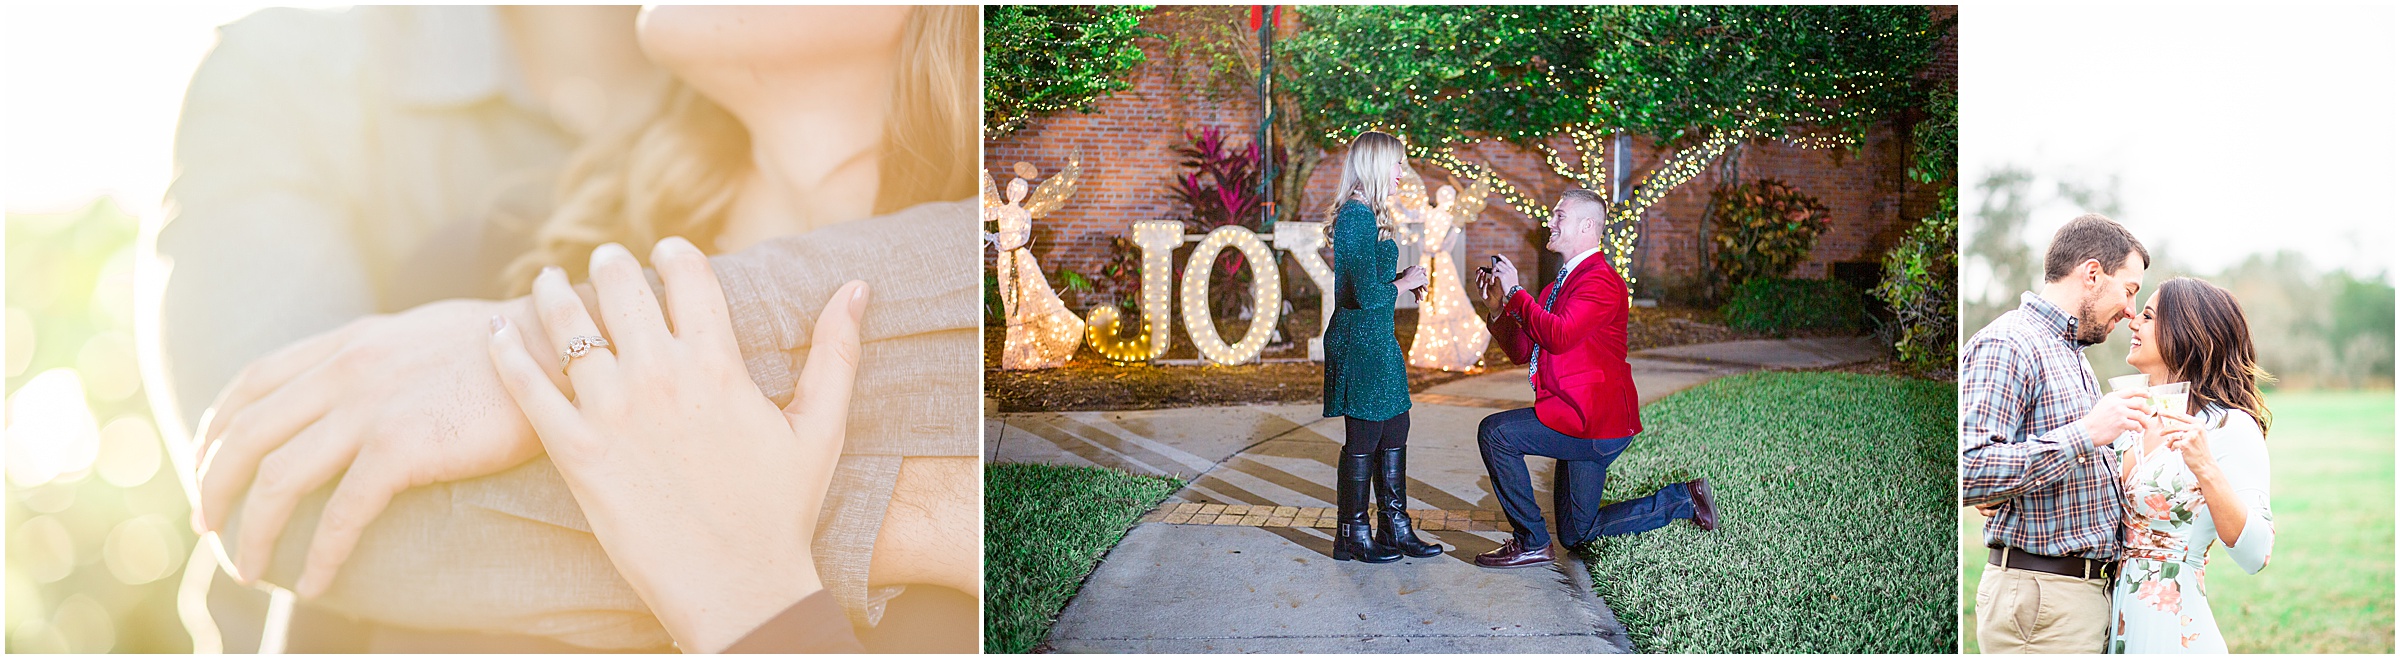 10 things to do after you get engaged